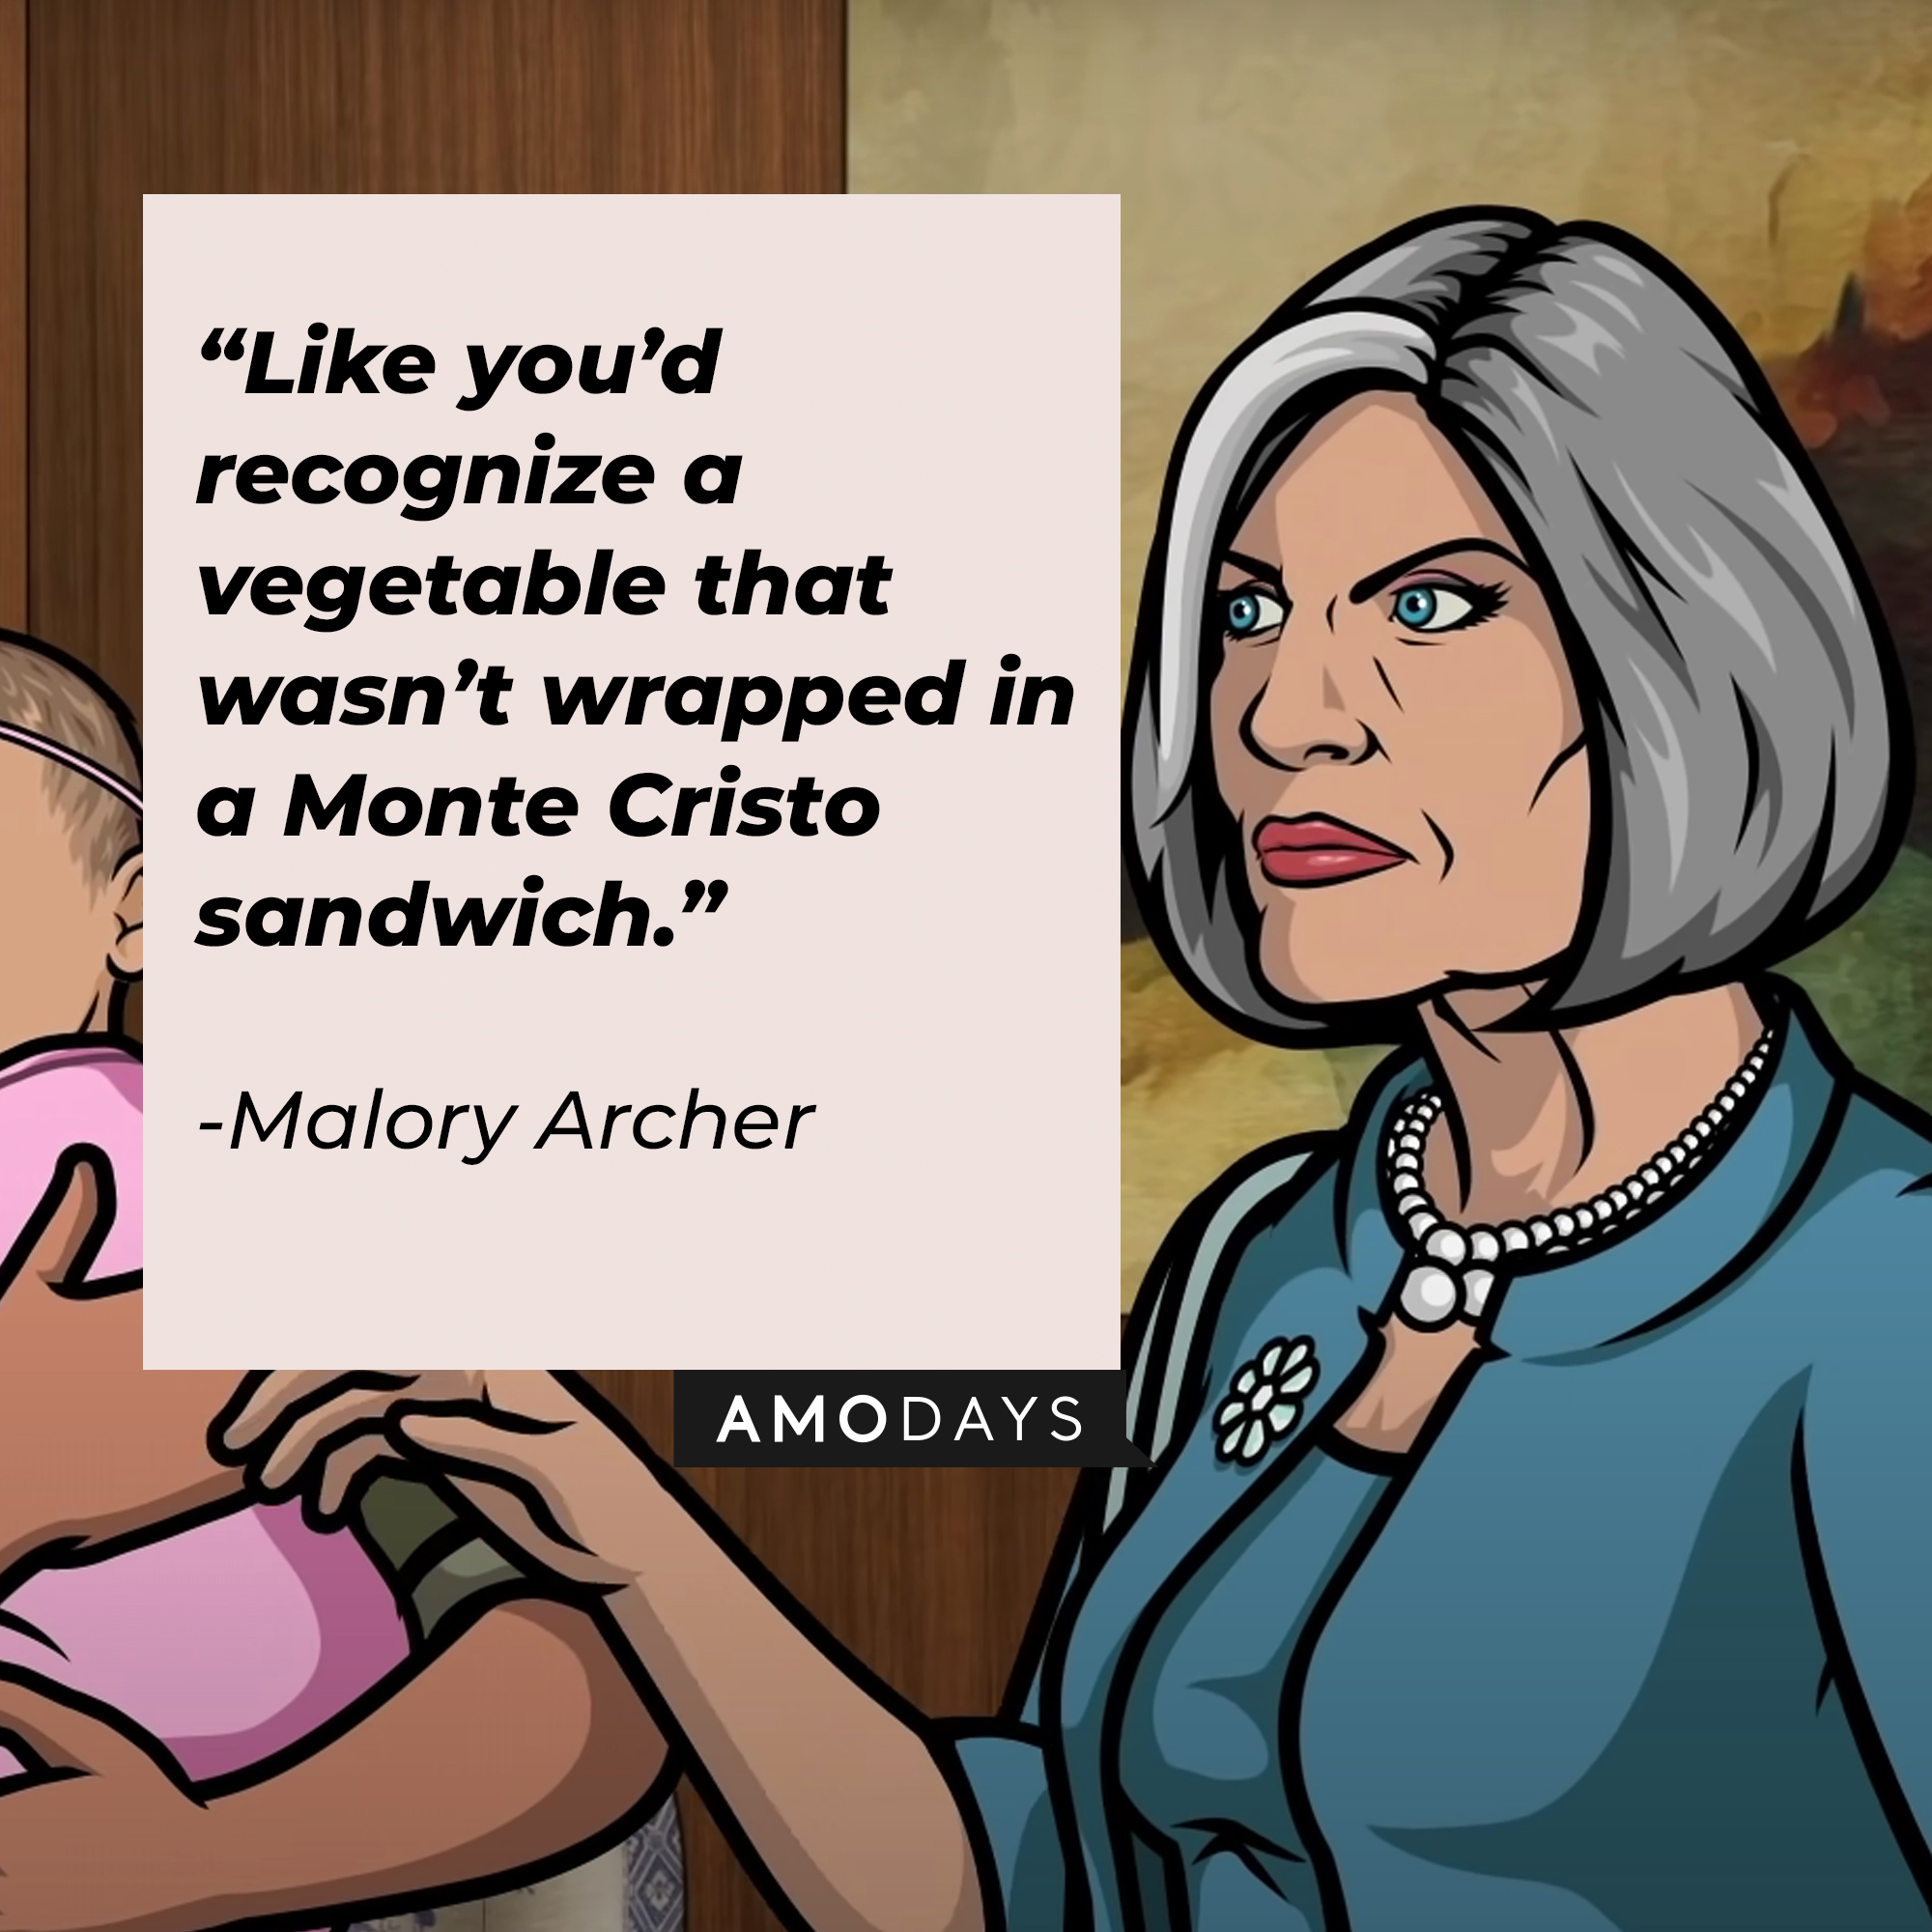 An Image of Malory Archer with her quote: “Like you’d recognize a vegetable that wasn’t wrapped in a Monte Cristo sandwich.” | Source: Youtube.com/Netflixnordic